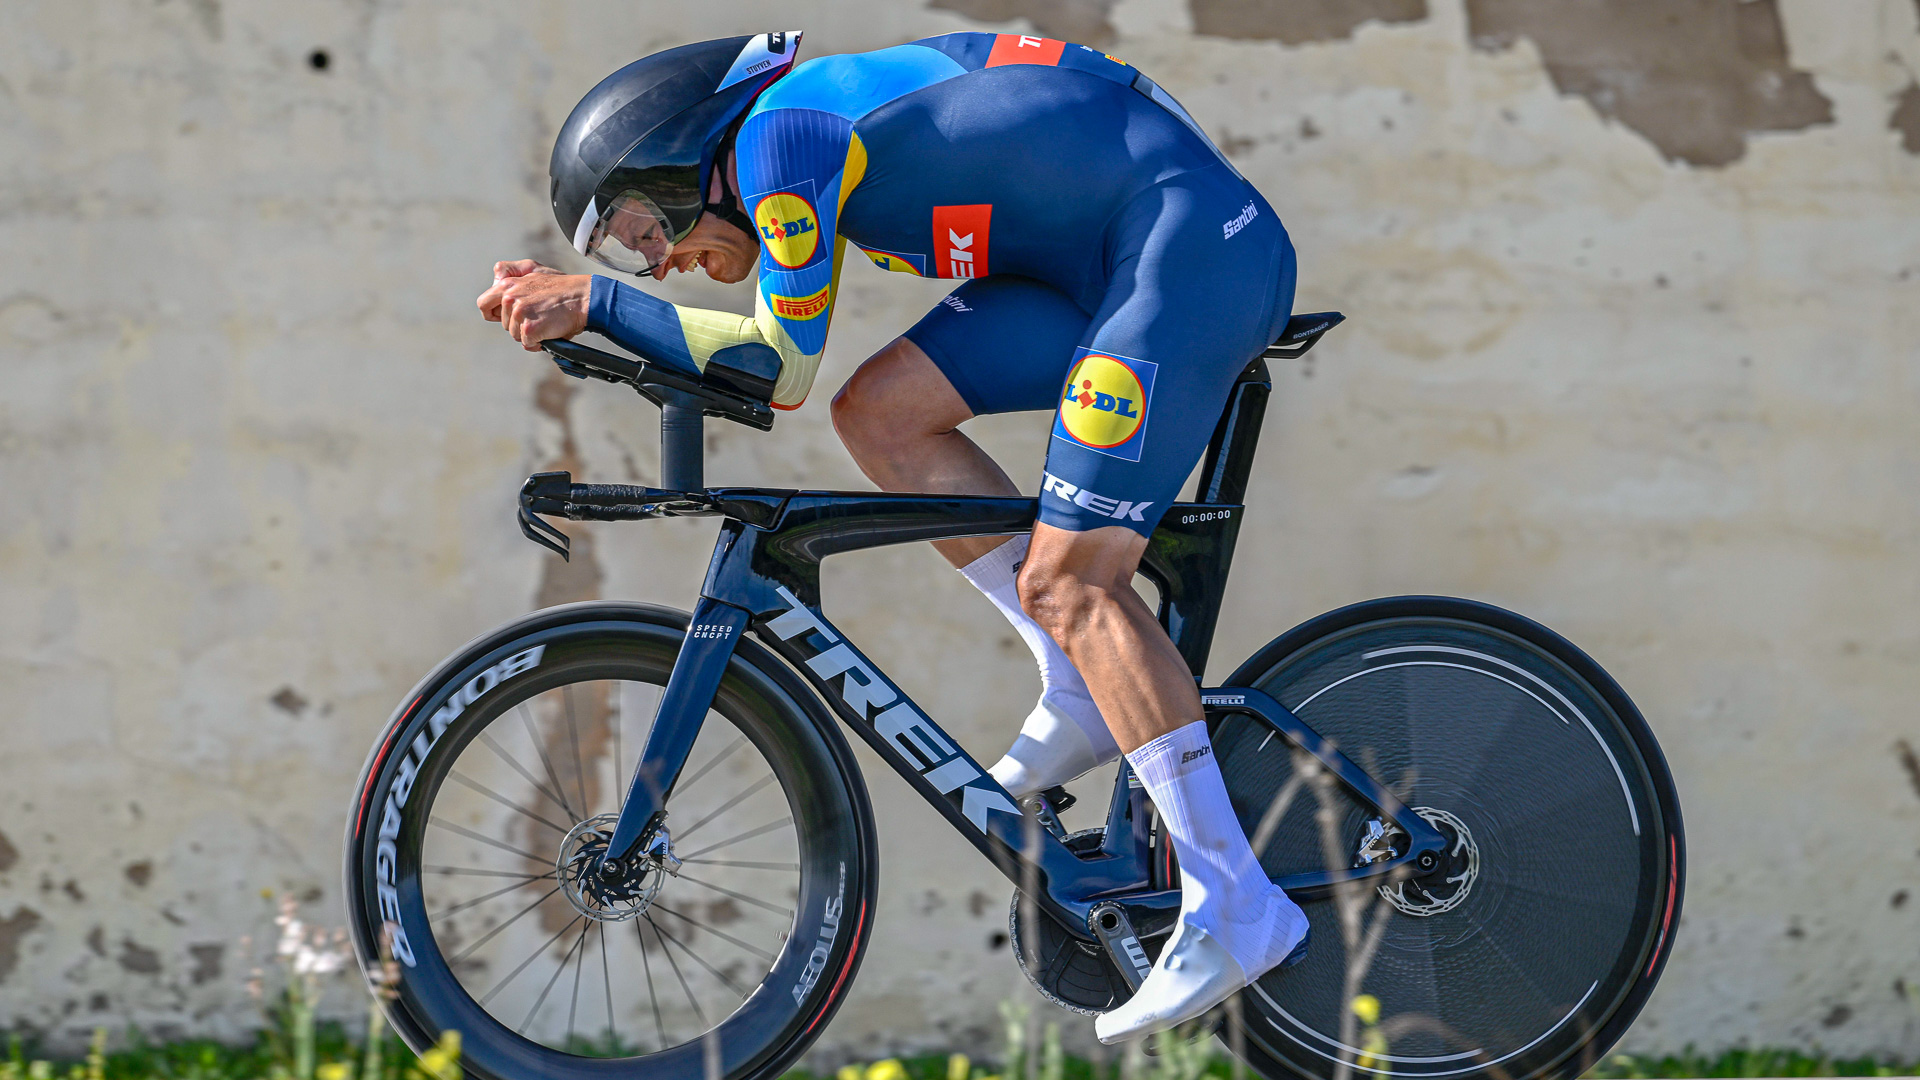 The image shows Jasper Stuyven time trialling at the Volta Algarve.